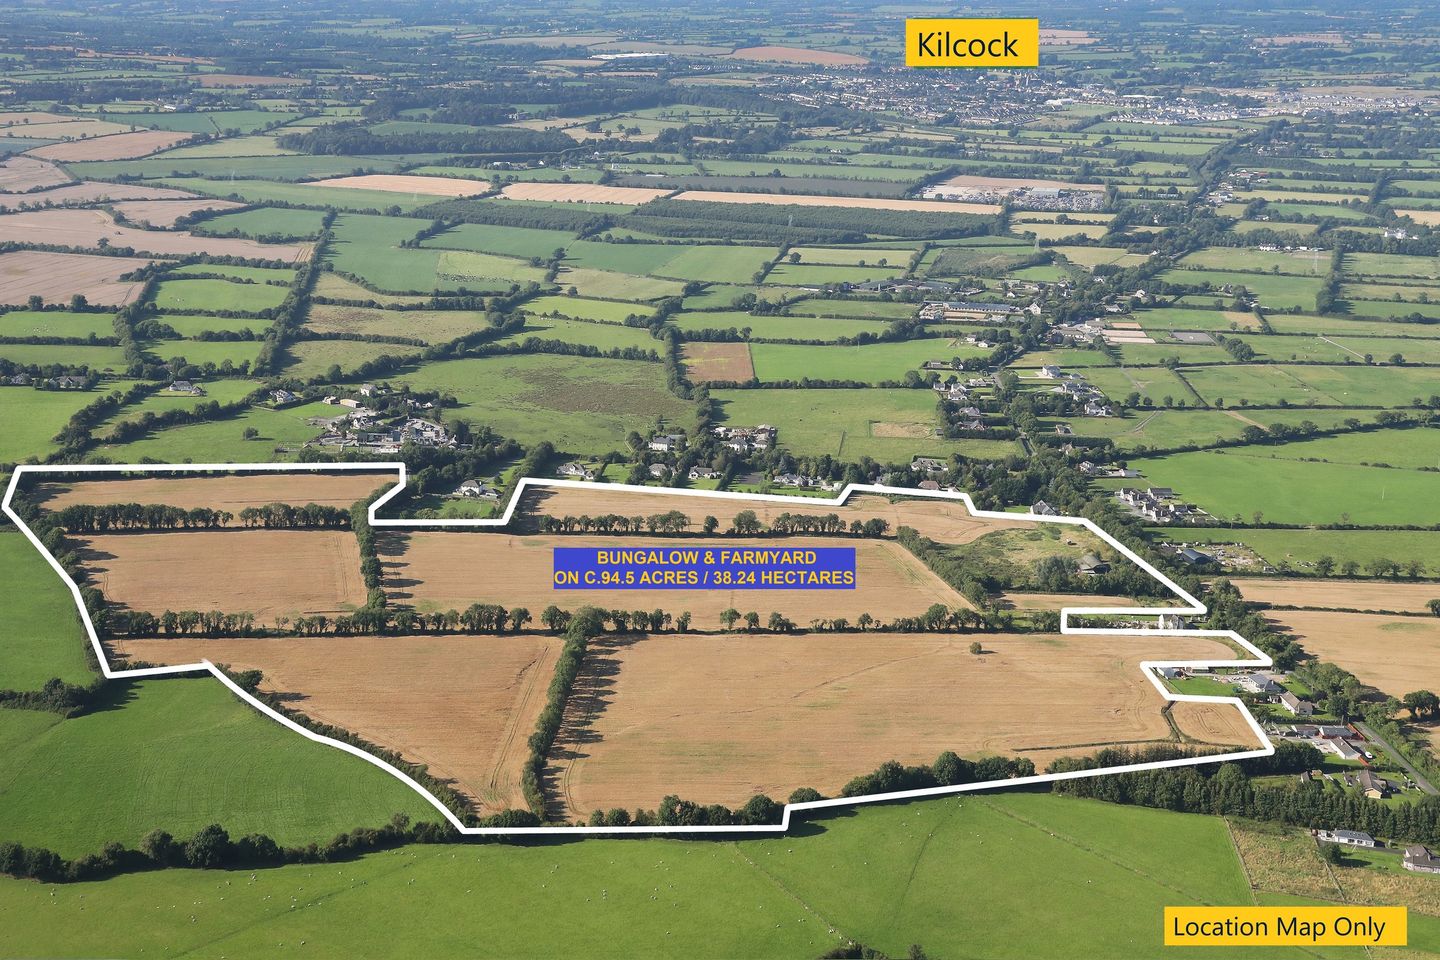 Bungalow & Farmyard On C. 94.5 Acres/ 38.24 Hectares, Maynooth, Co. Kildare, W23EE98